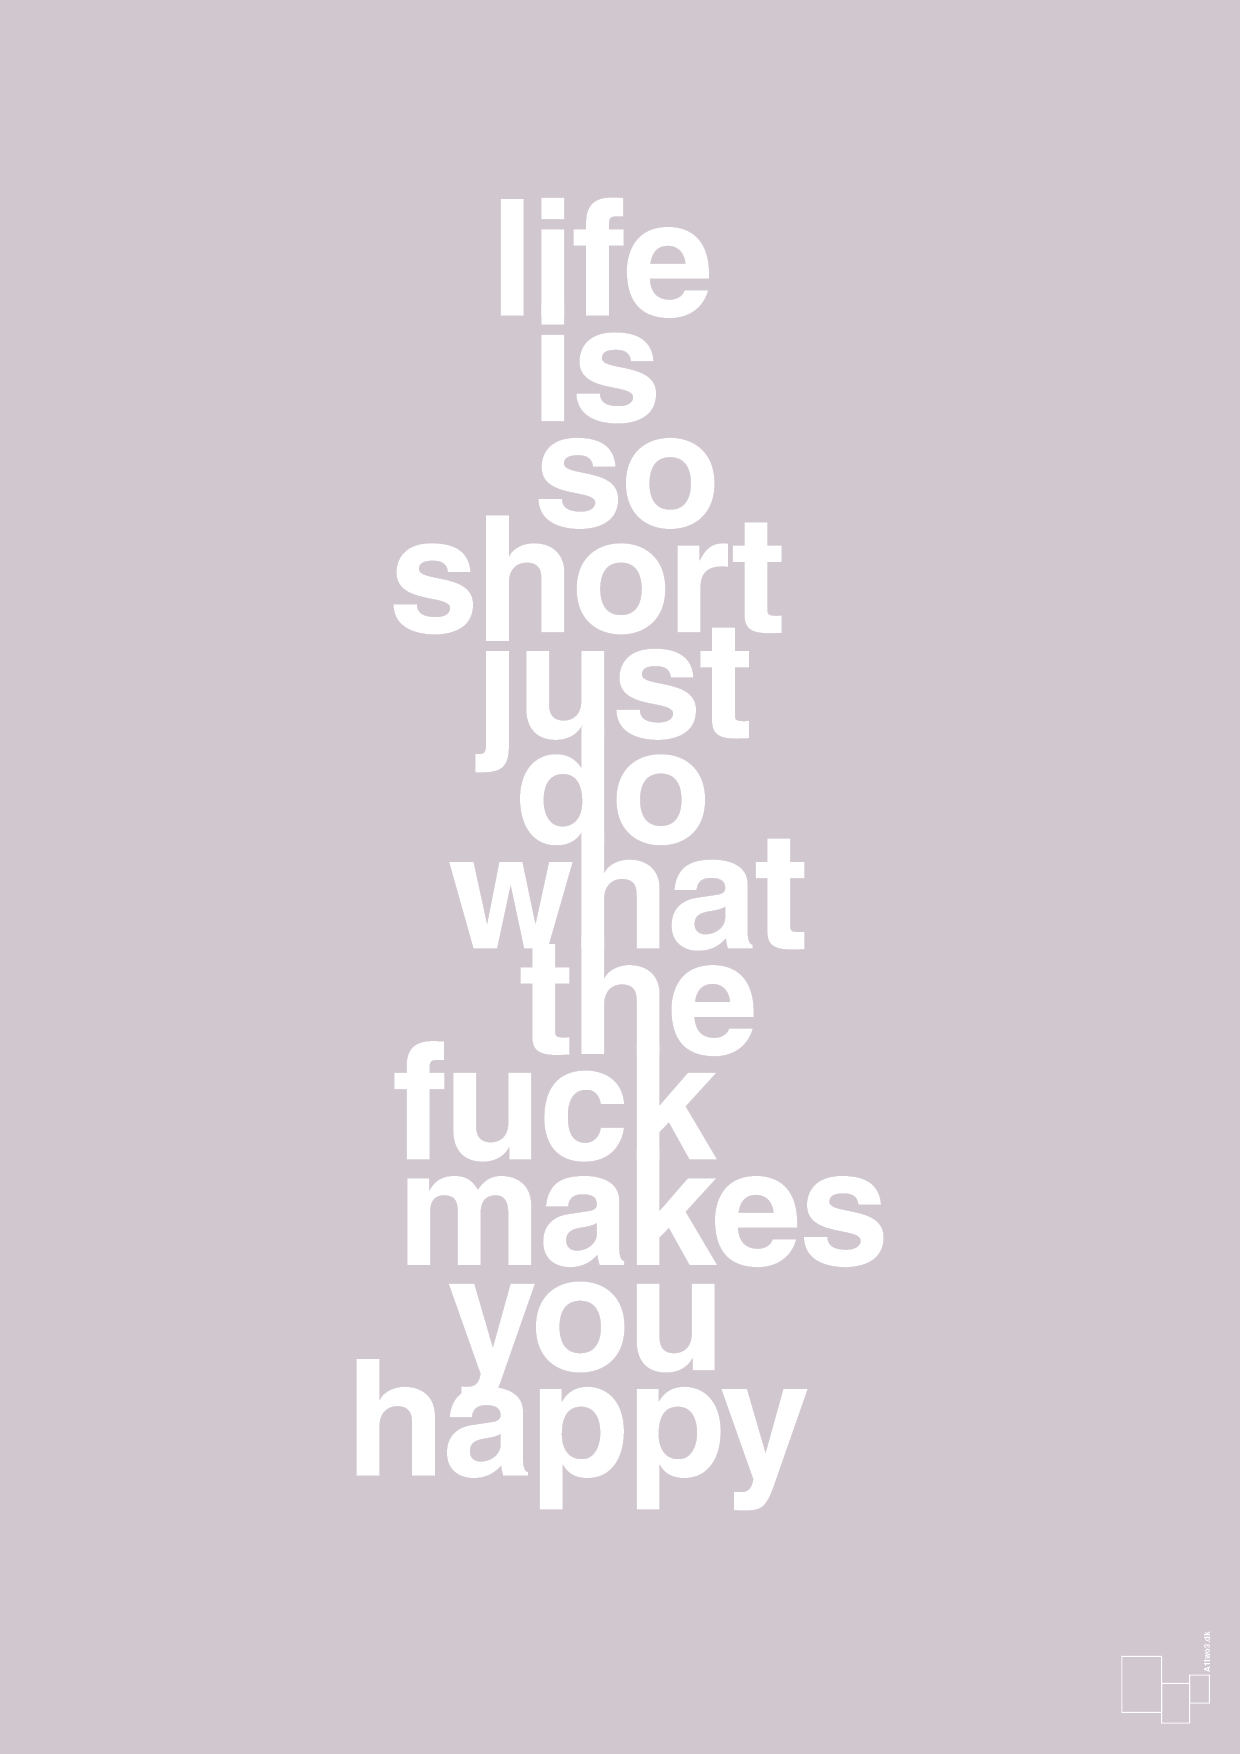 life is so short just do what the fuck makes you happy - Plakat med Ordsprog i Dusty Lilac